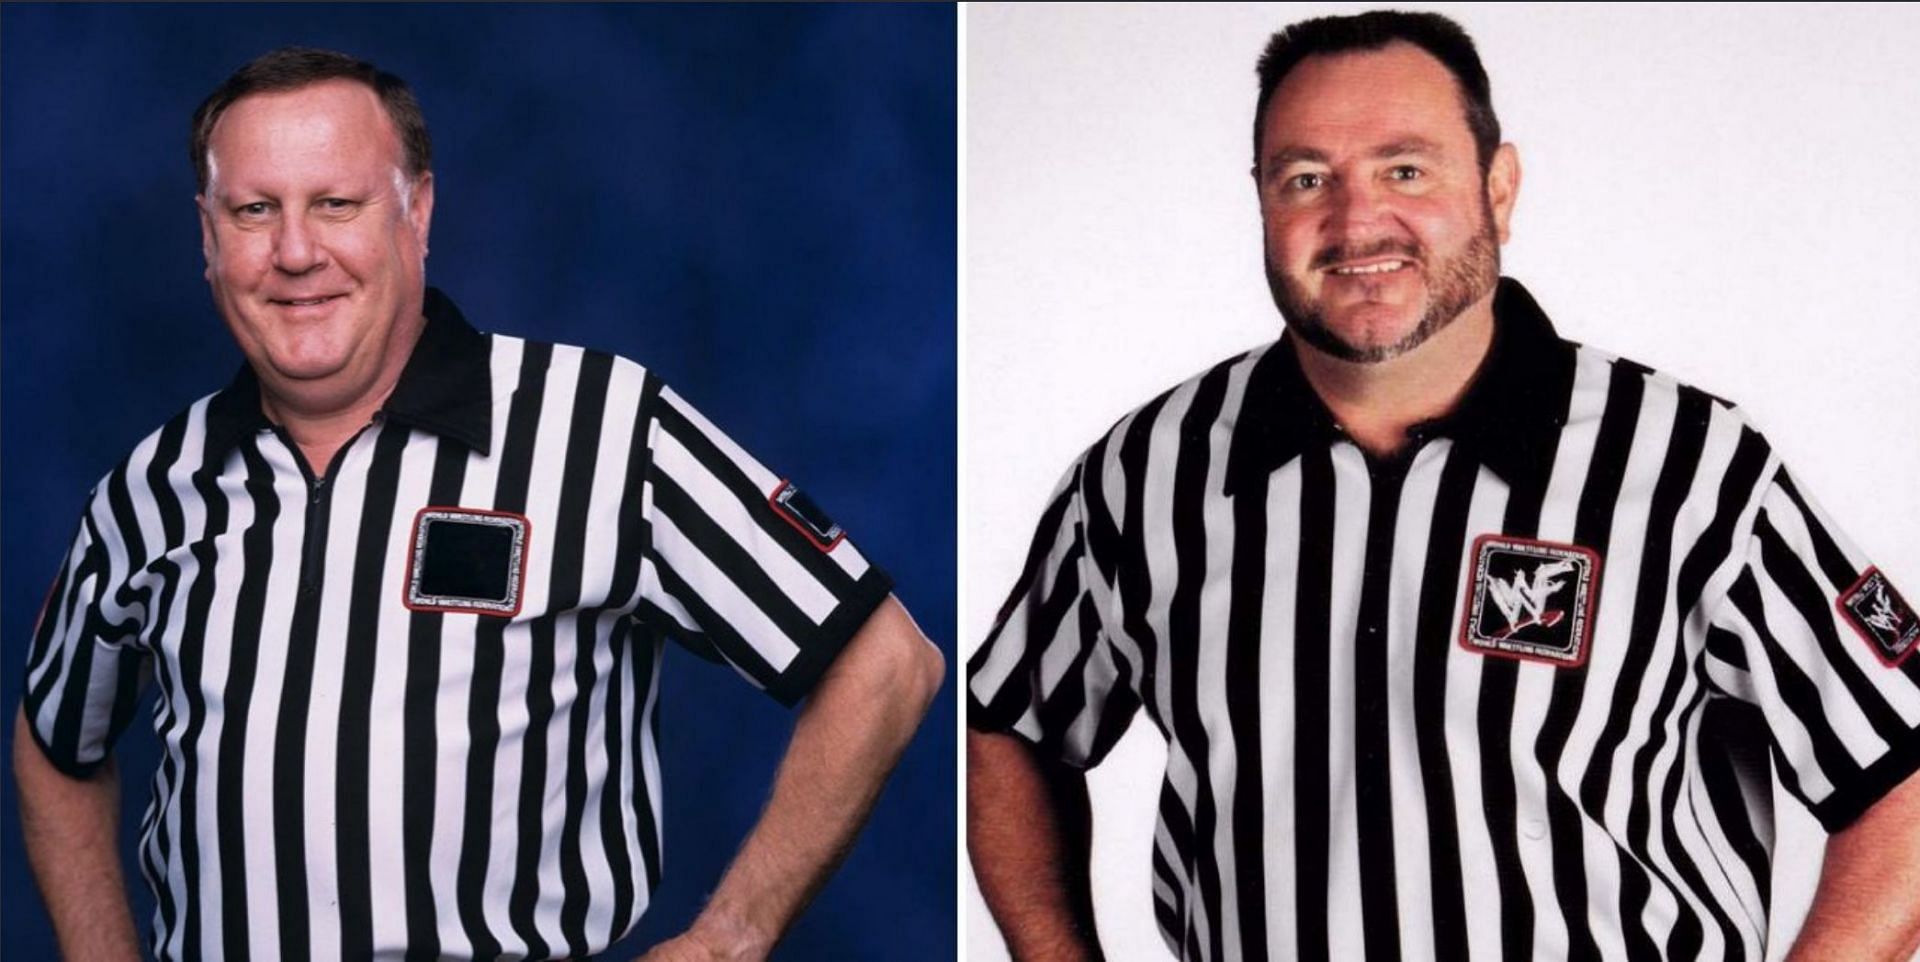 Both former WWE referees passed away this past week